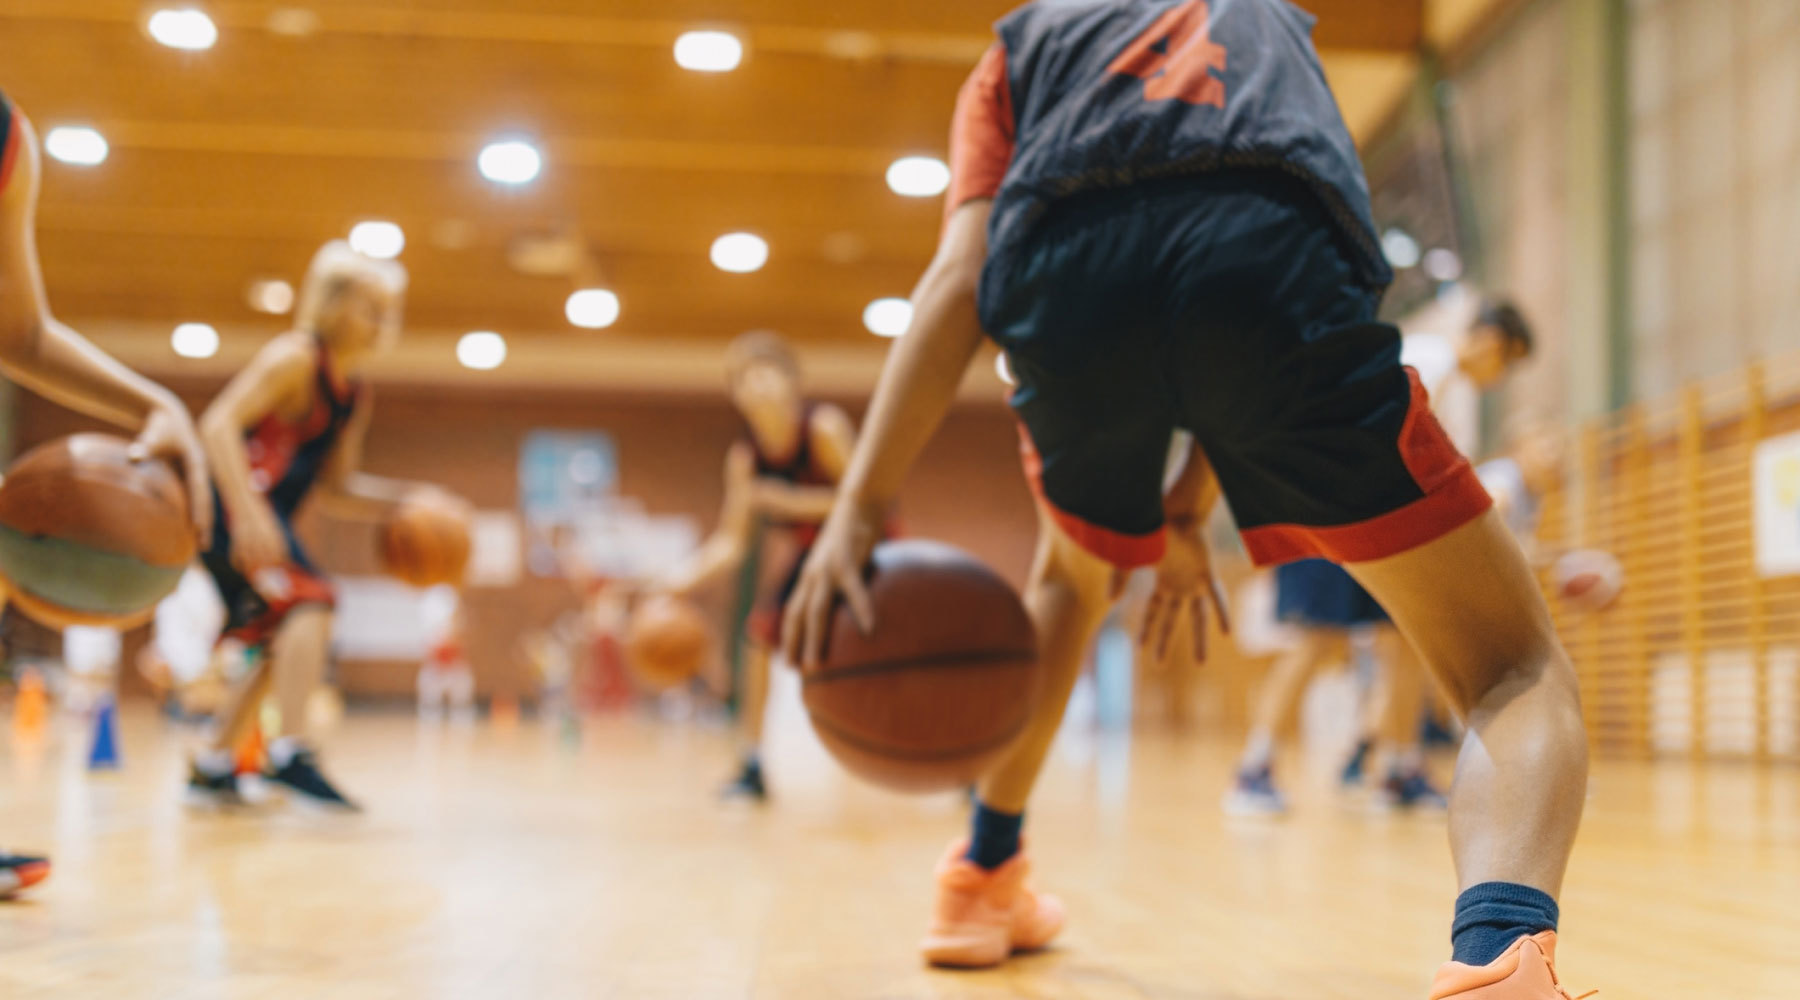 How to Prevent Injuries in Basketball